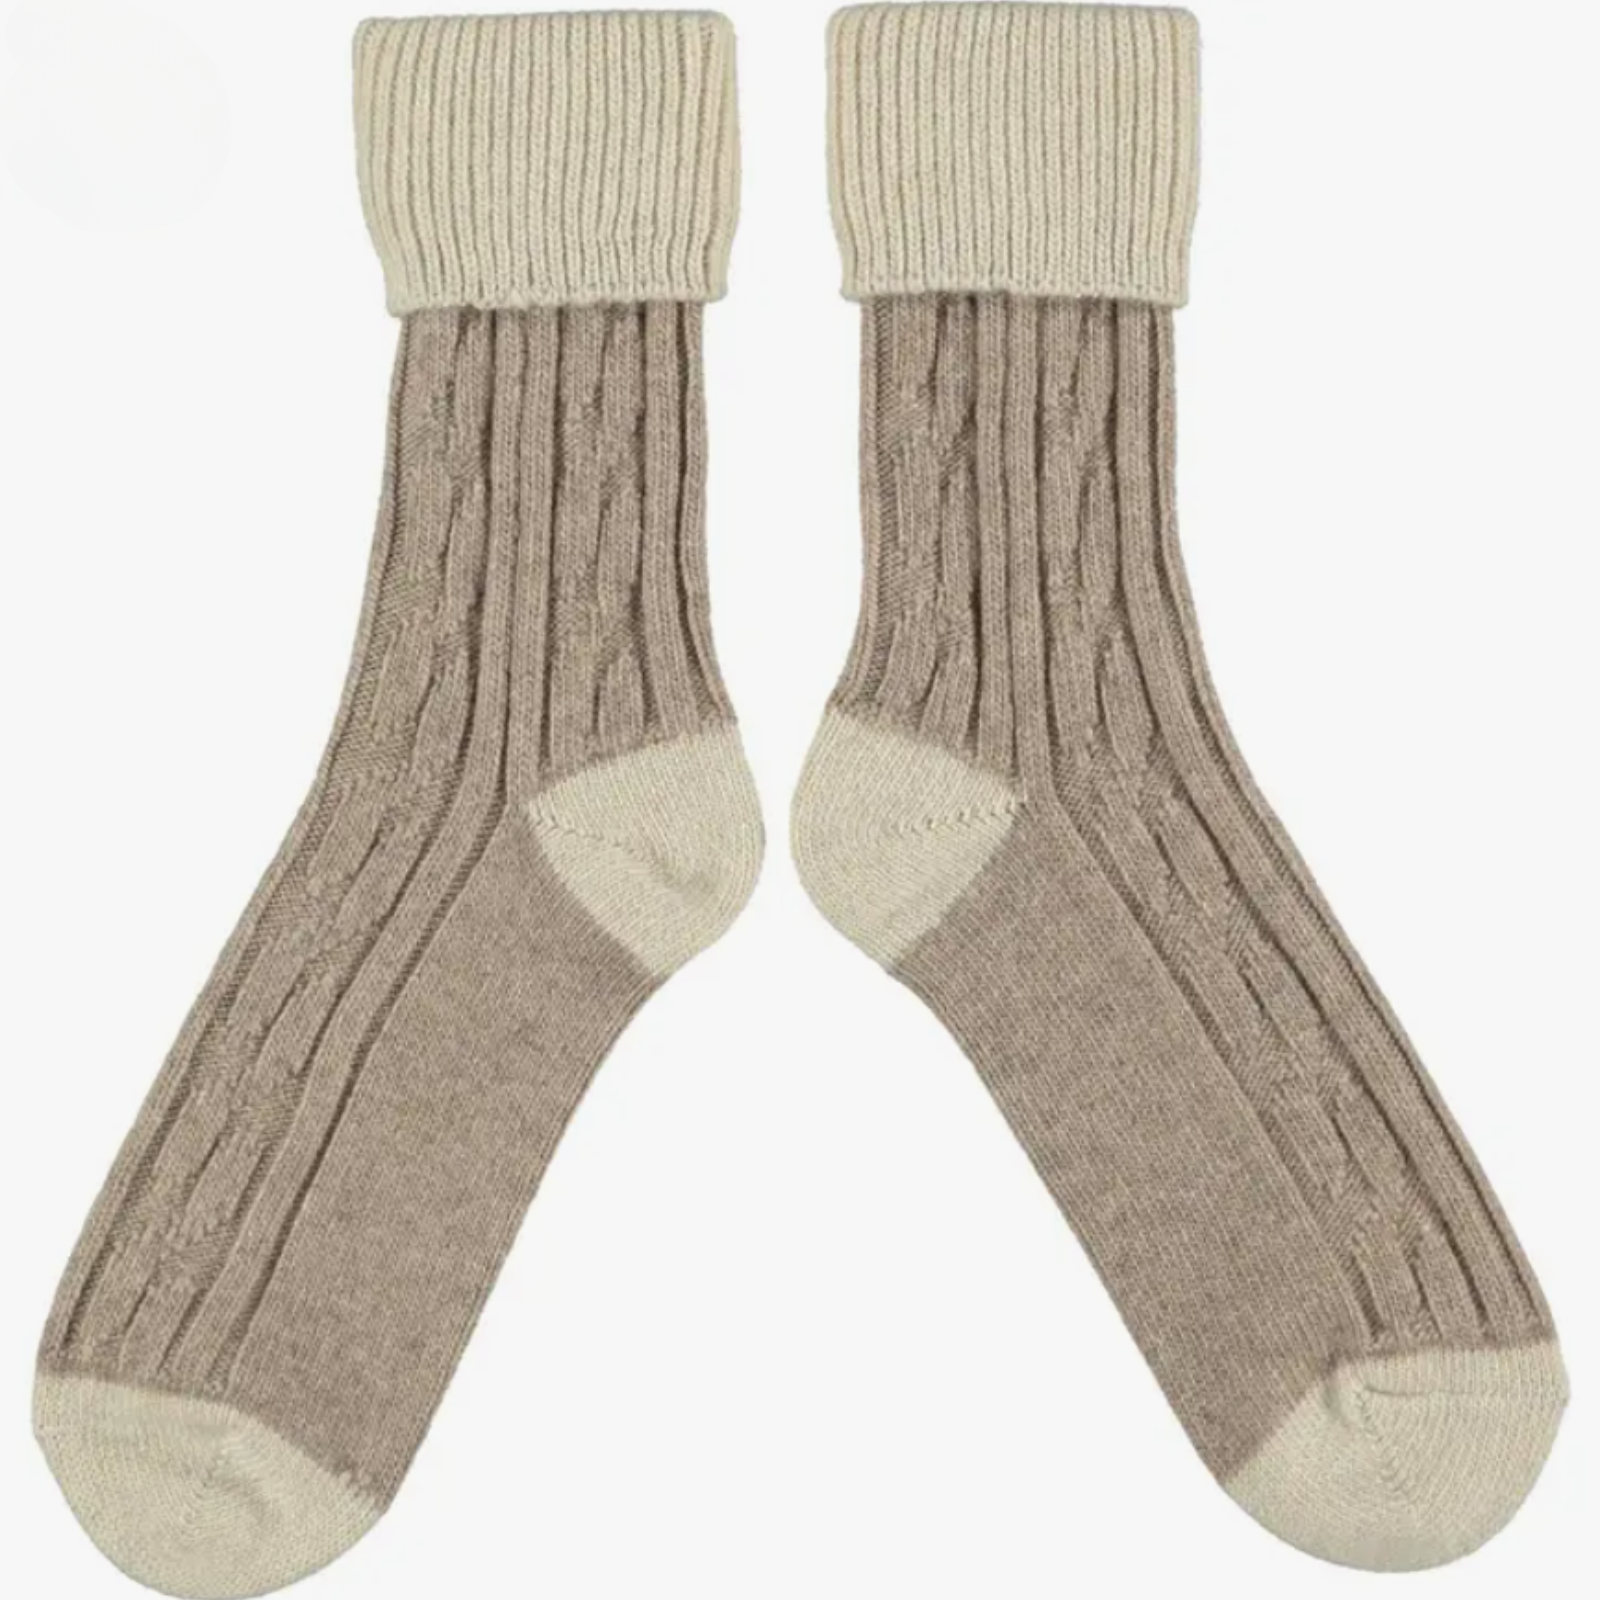 Catherine Tough Slouch Cashmere Blend women's and men's crew socks featuring cable knit socks with oatmeal colored cuff, heel and toes and mushroom colored body. Socks shown on display. 